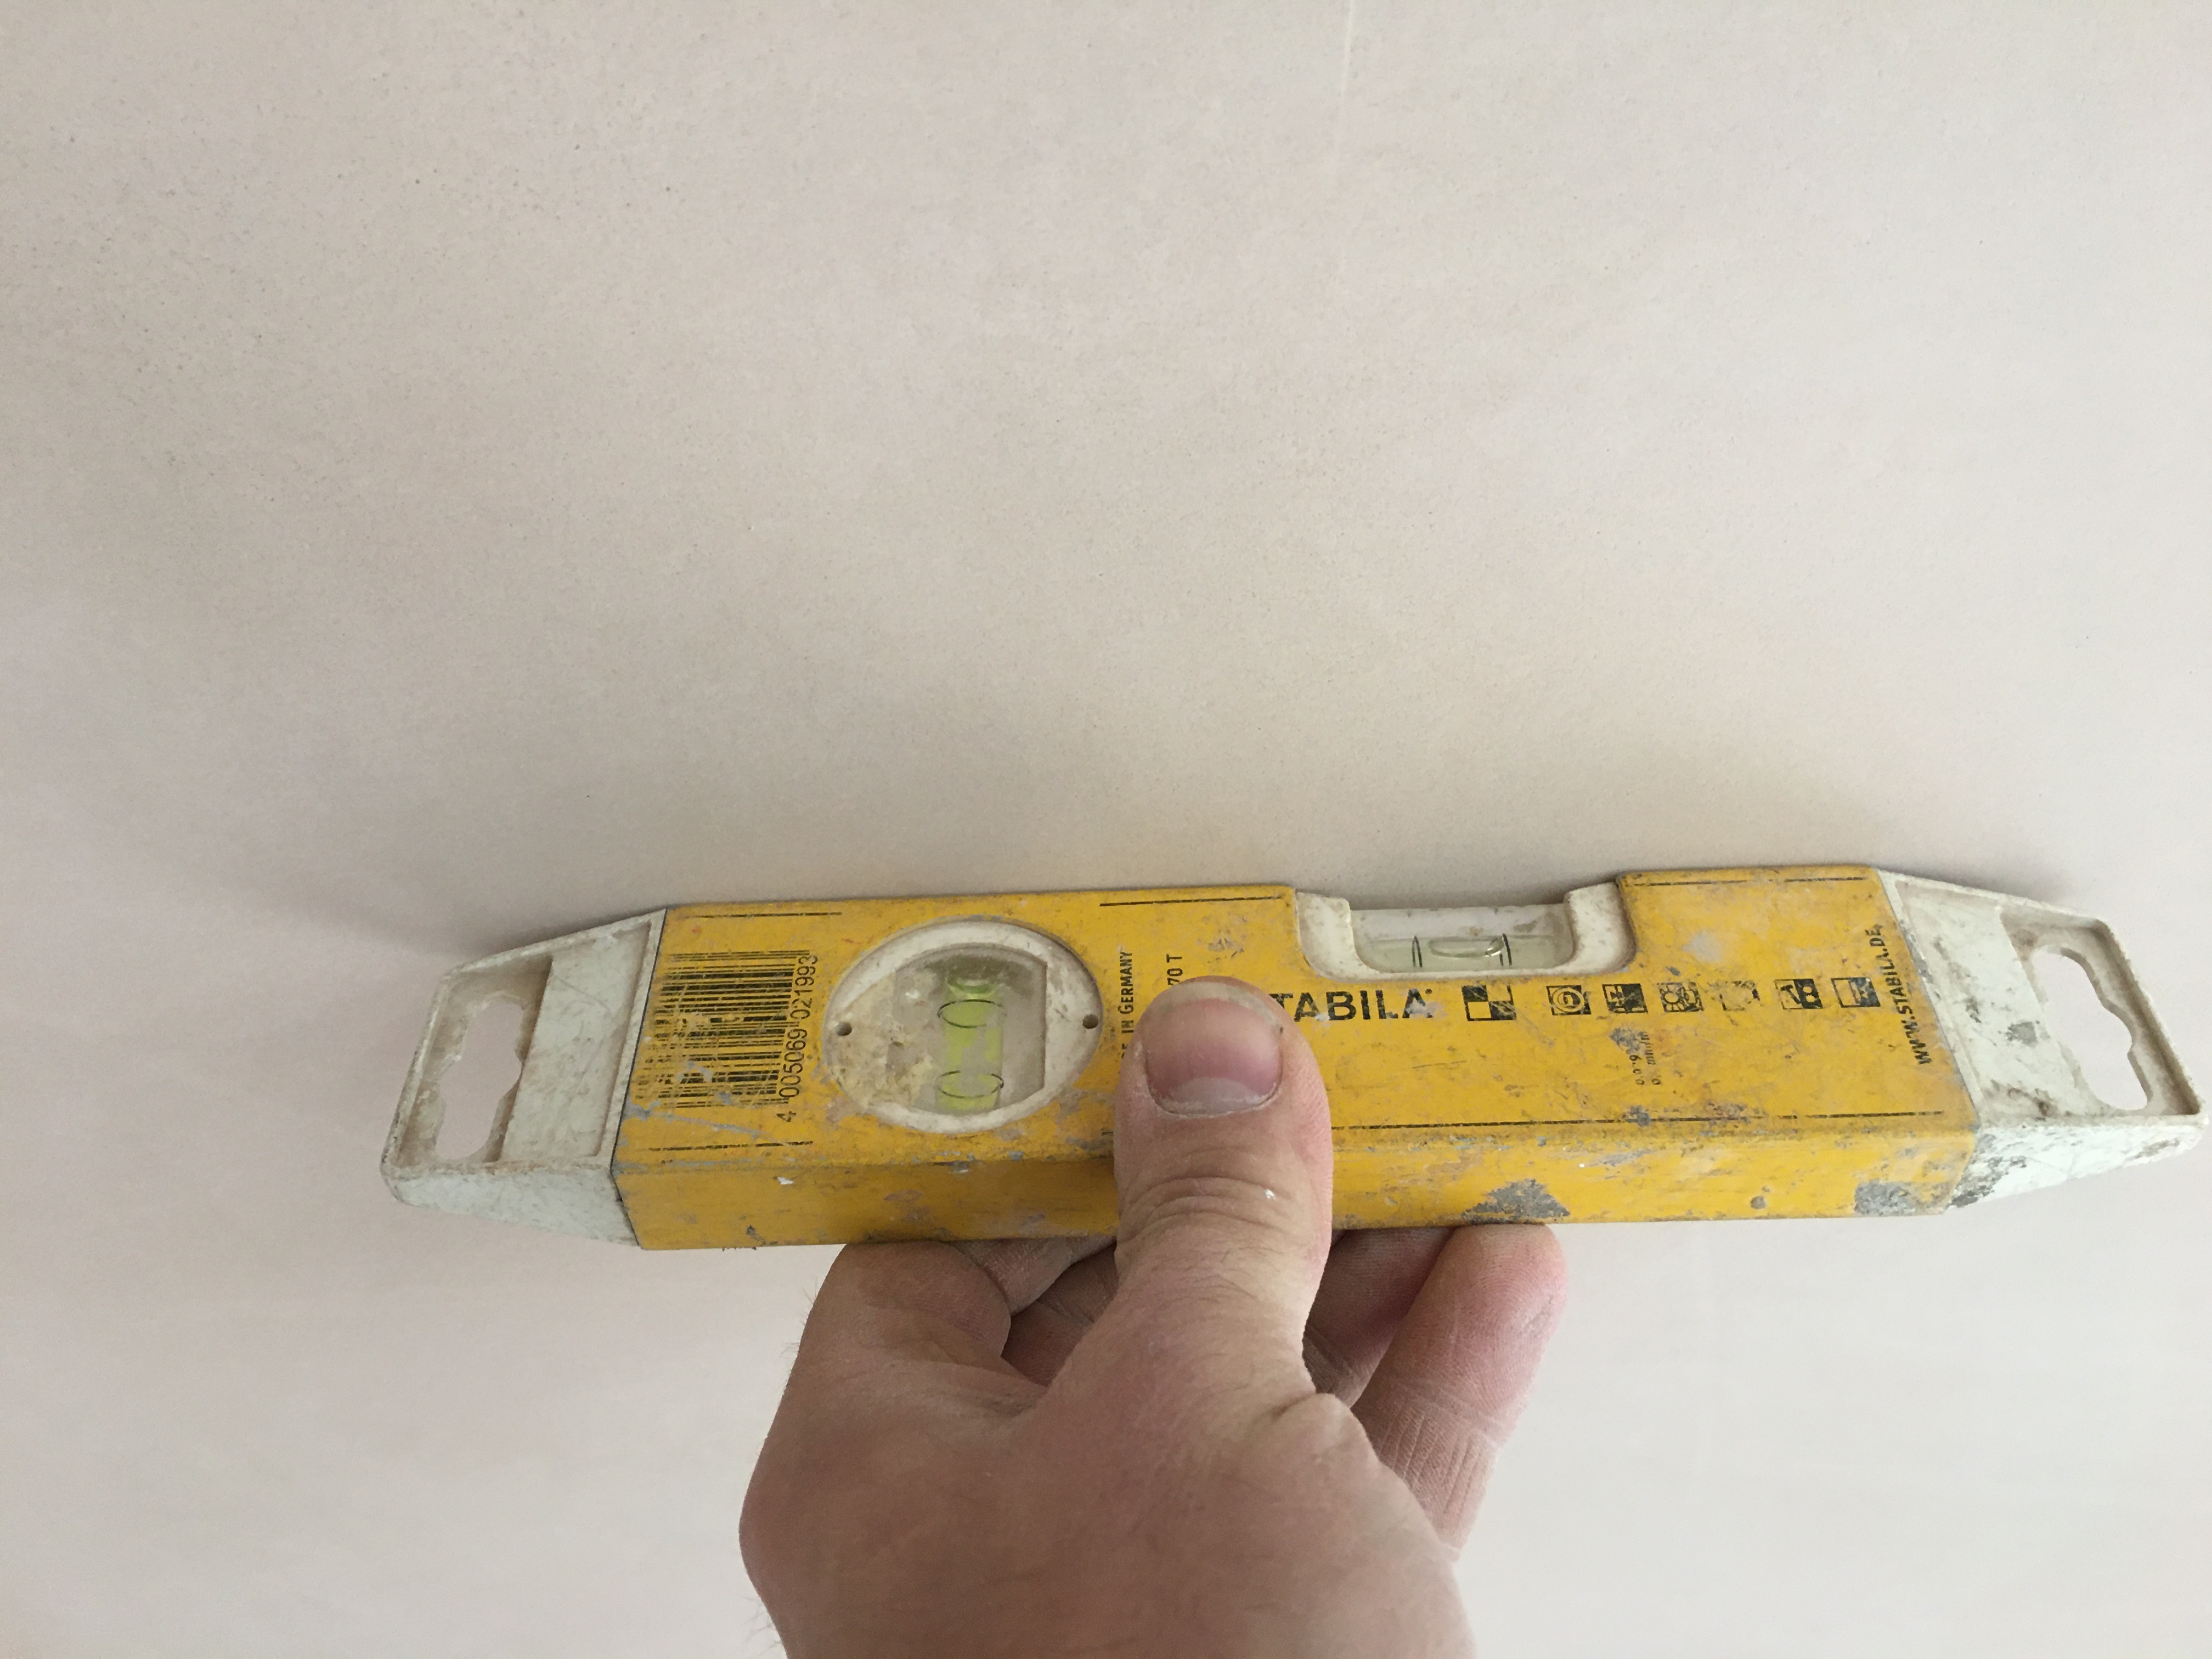 Ceiling flatness after skimming